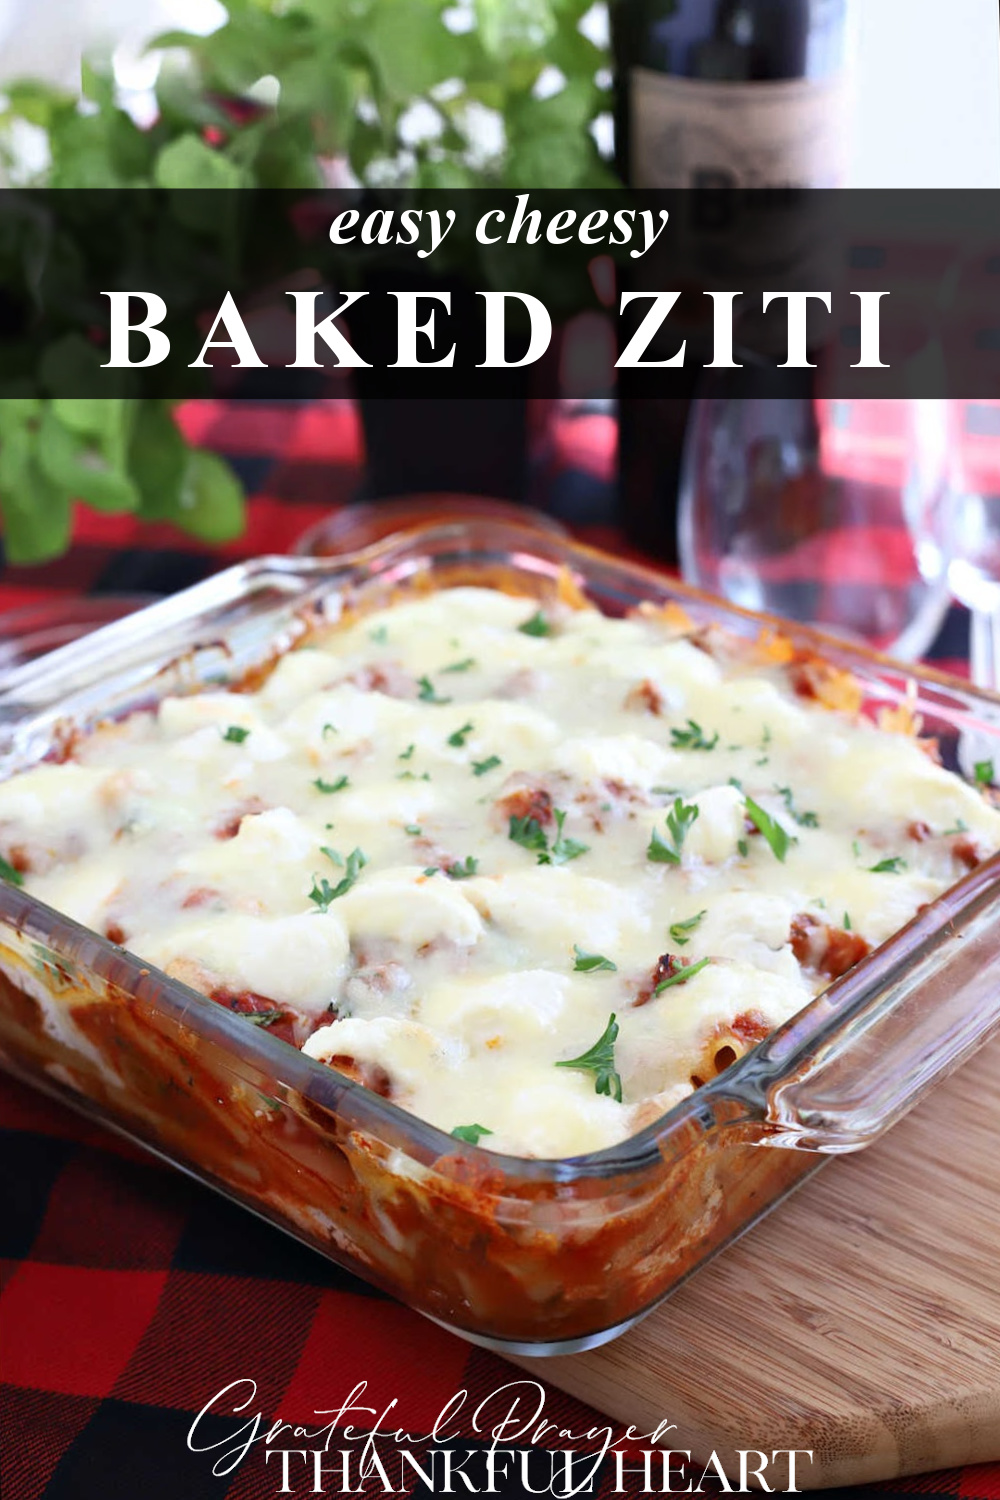 Cheesy baked ziti, a classis pasta casserole, with sausage or ground beef, tomato sauce, ricotta, mozzarella and parmesan is an easy recipe.